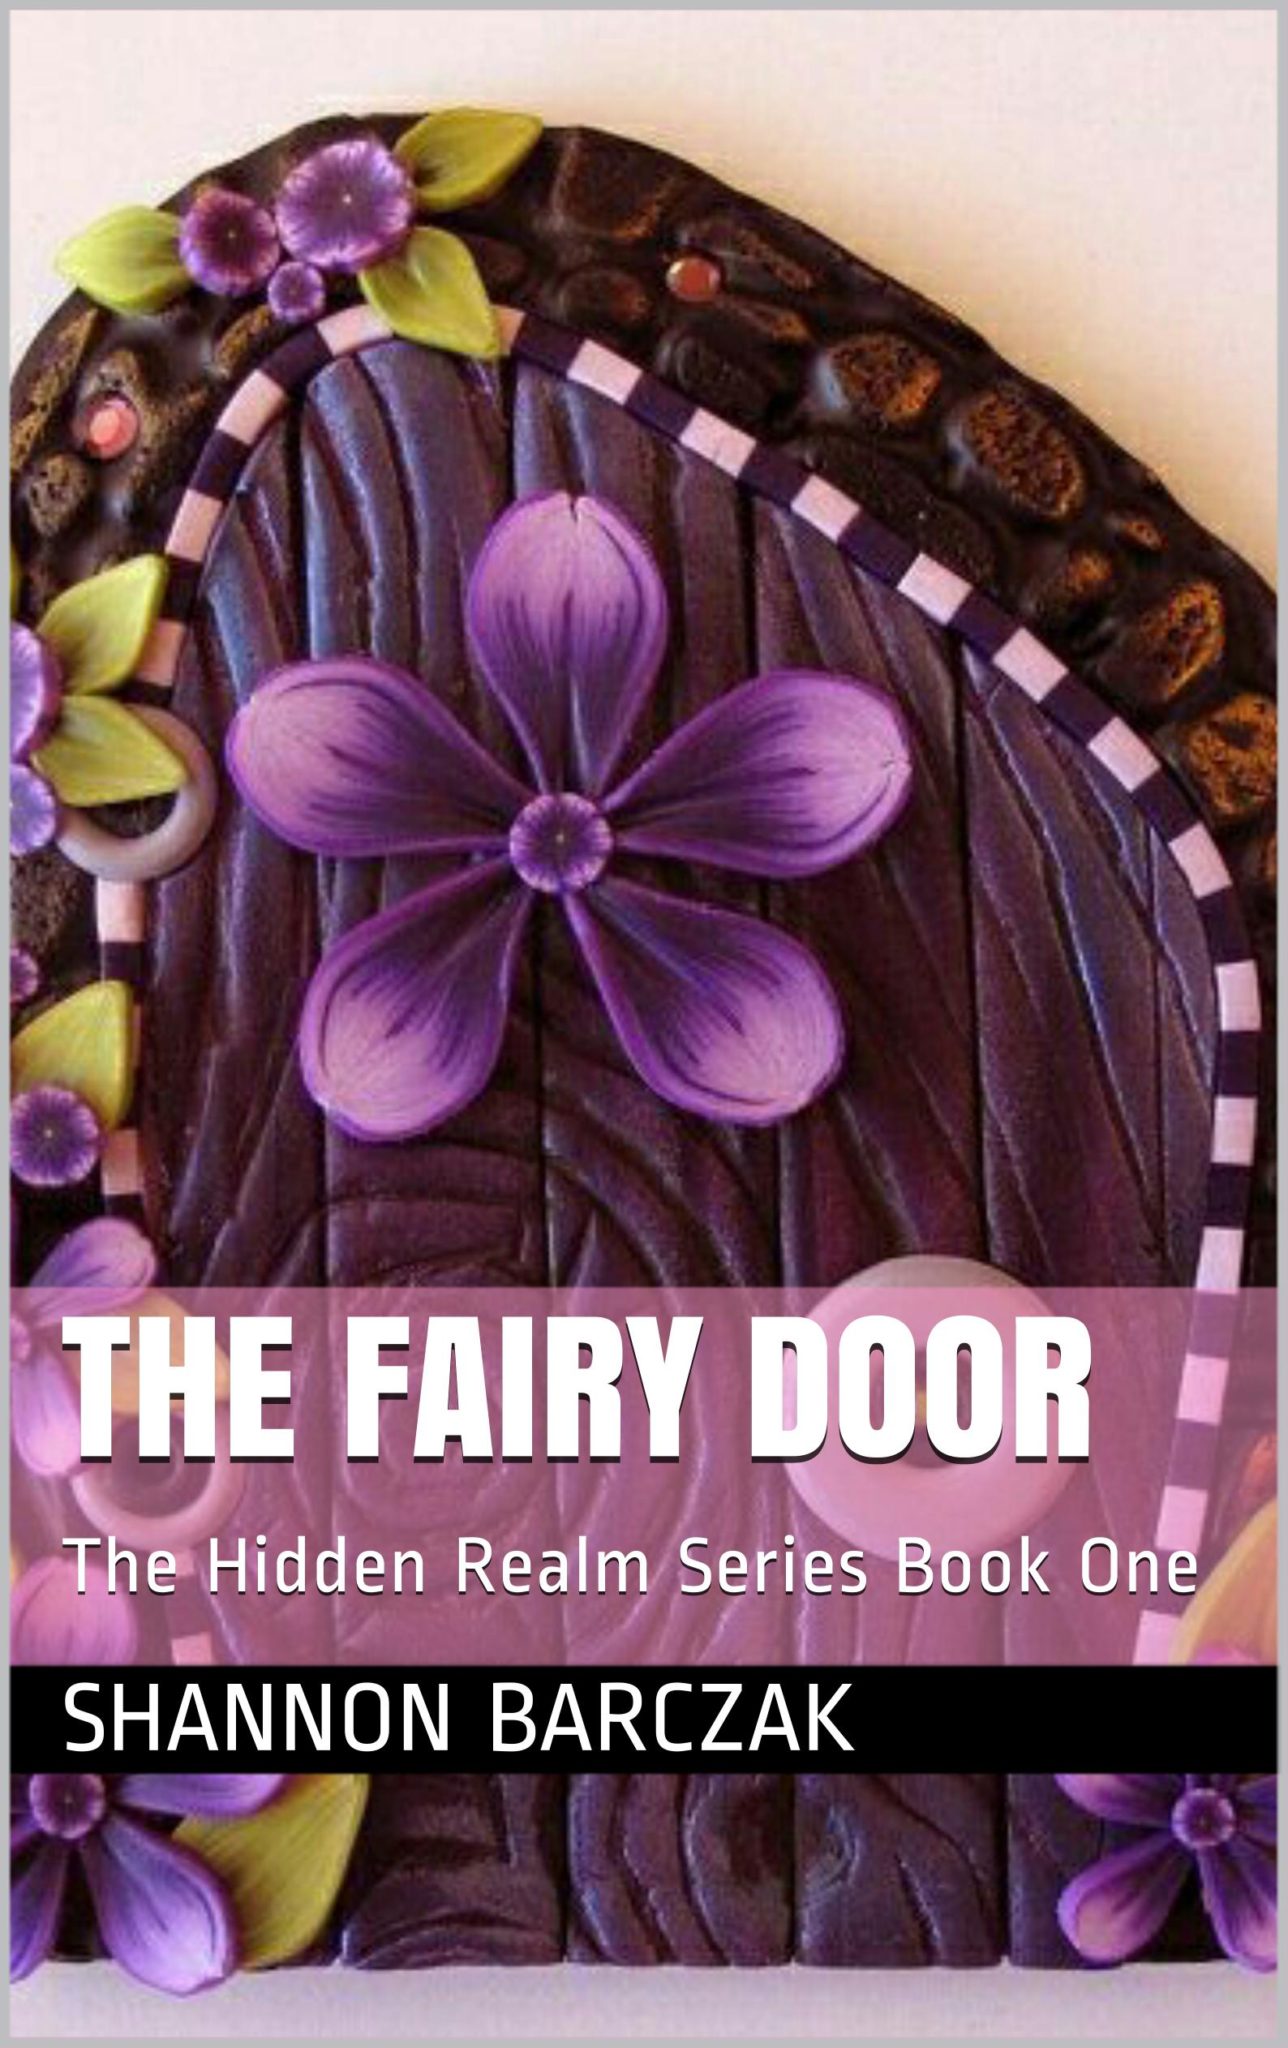 FREE: The Fairy Door by Shannon Barczak